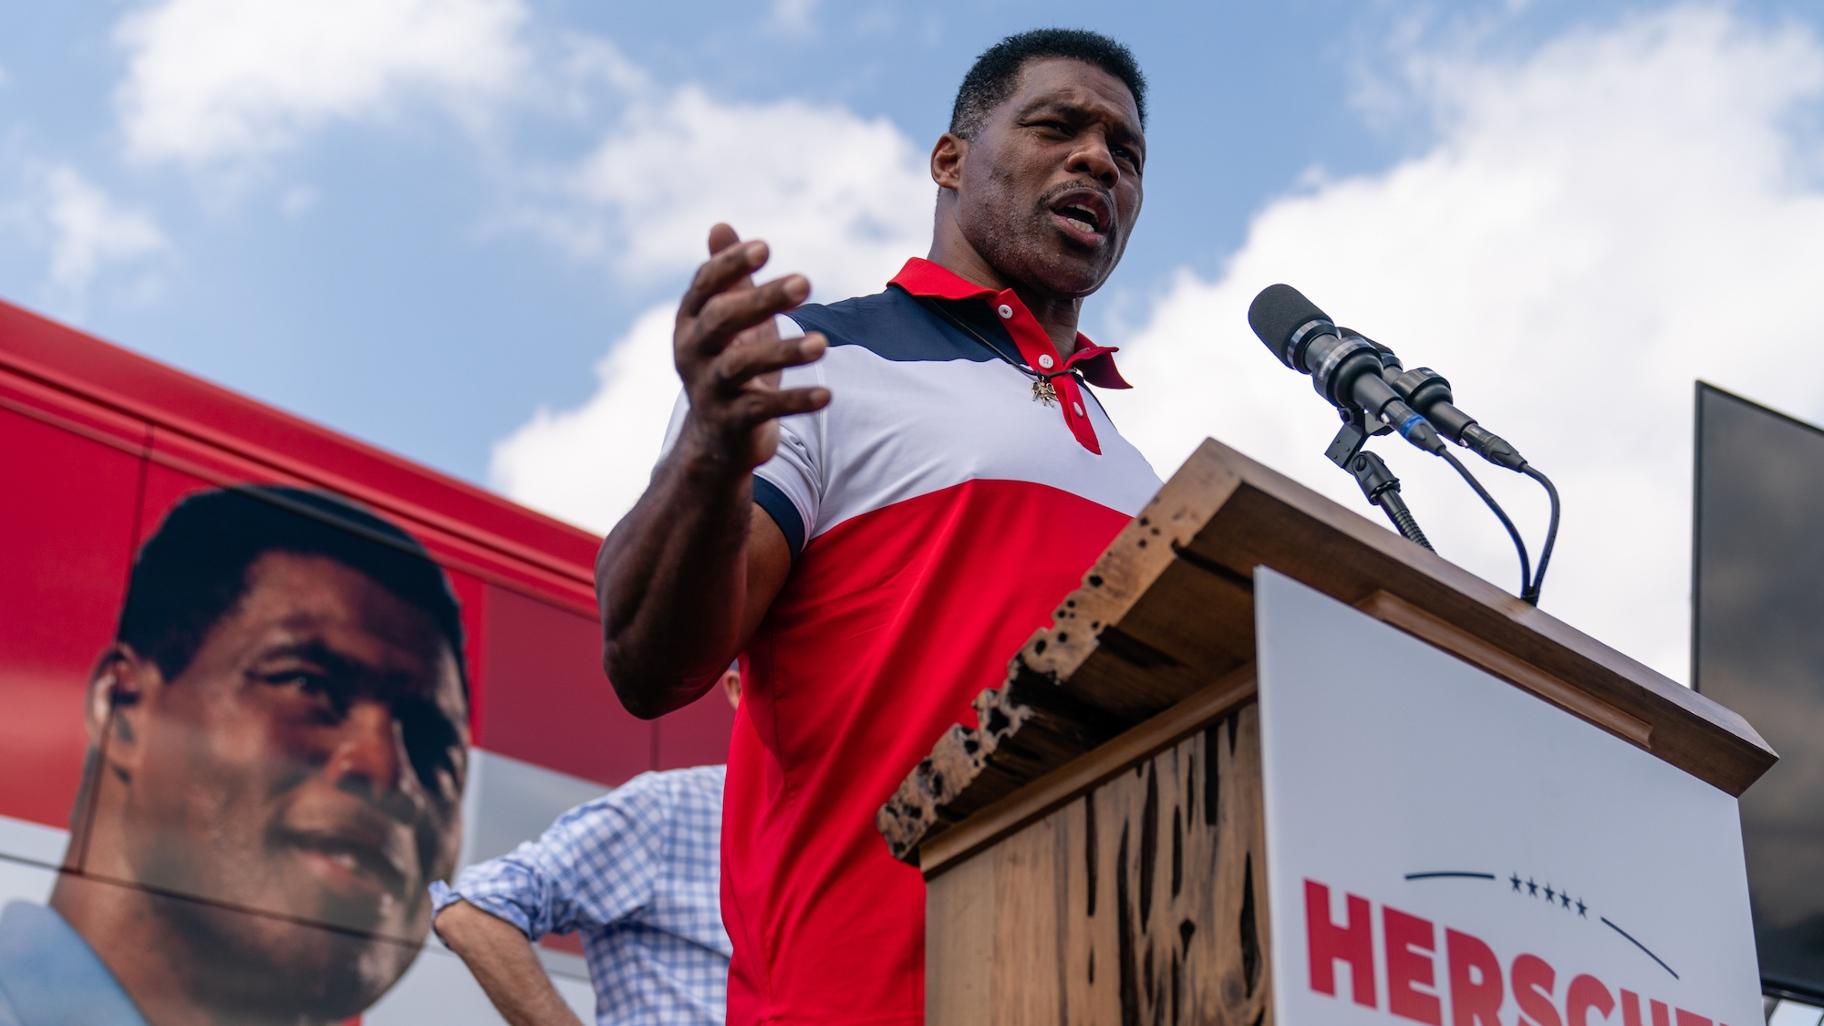 Georgia Republican Senate candidate Herschel Walker, here in Carrollton, Georgia on Oct. 11, 2022, described himself during a campaign speech in January as living in Texas. (Elijah Nouvelage / Getty Images via CNN)